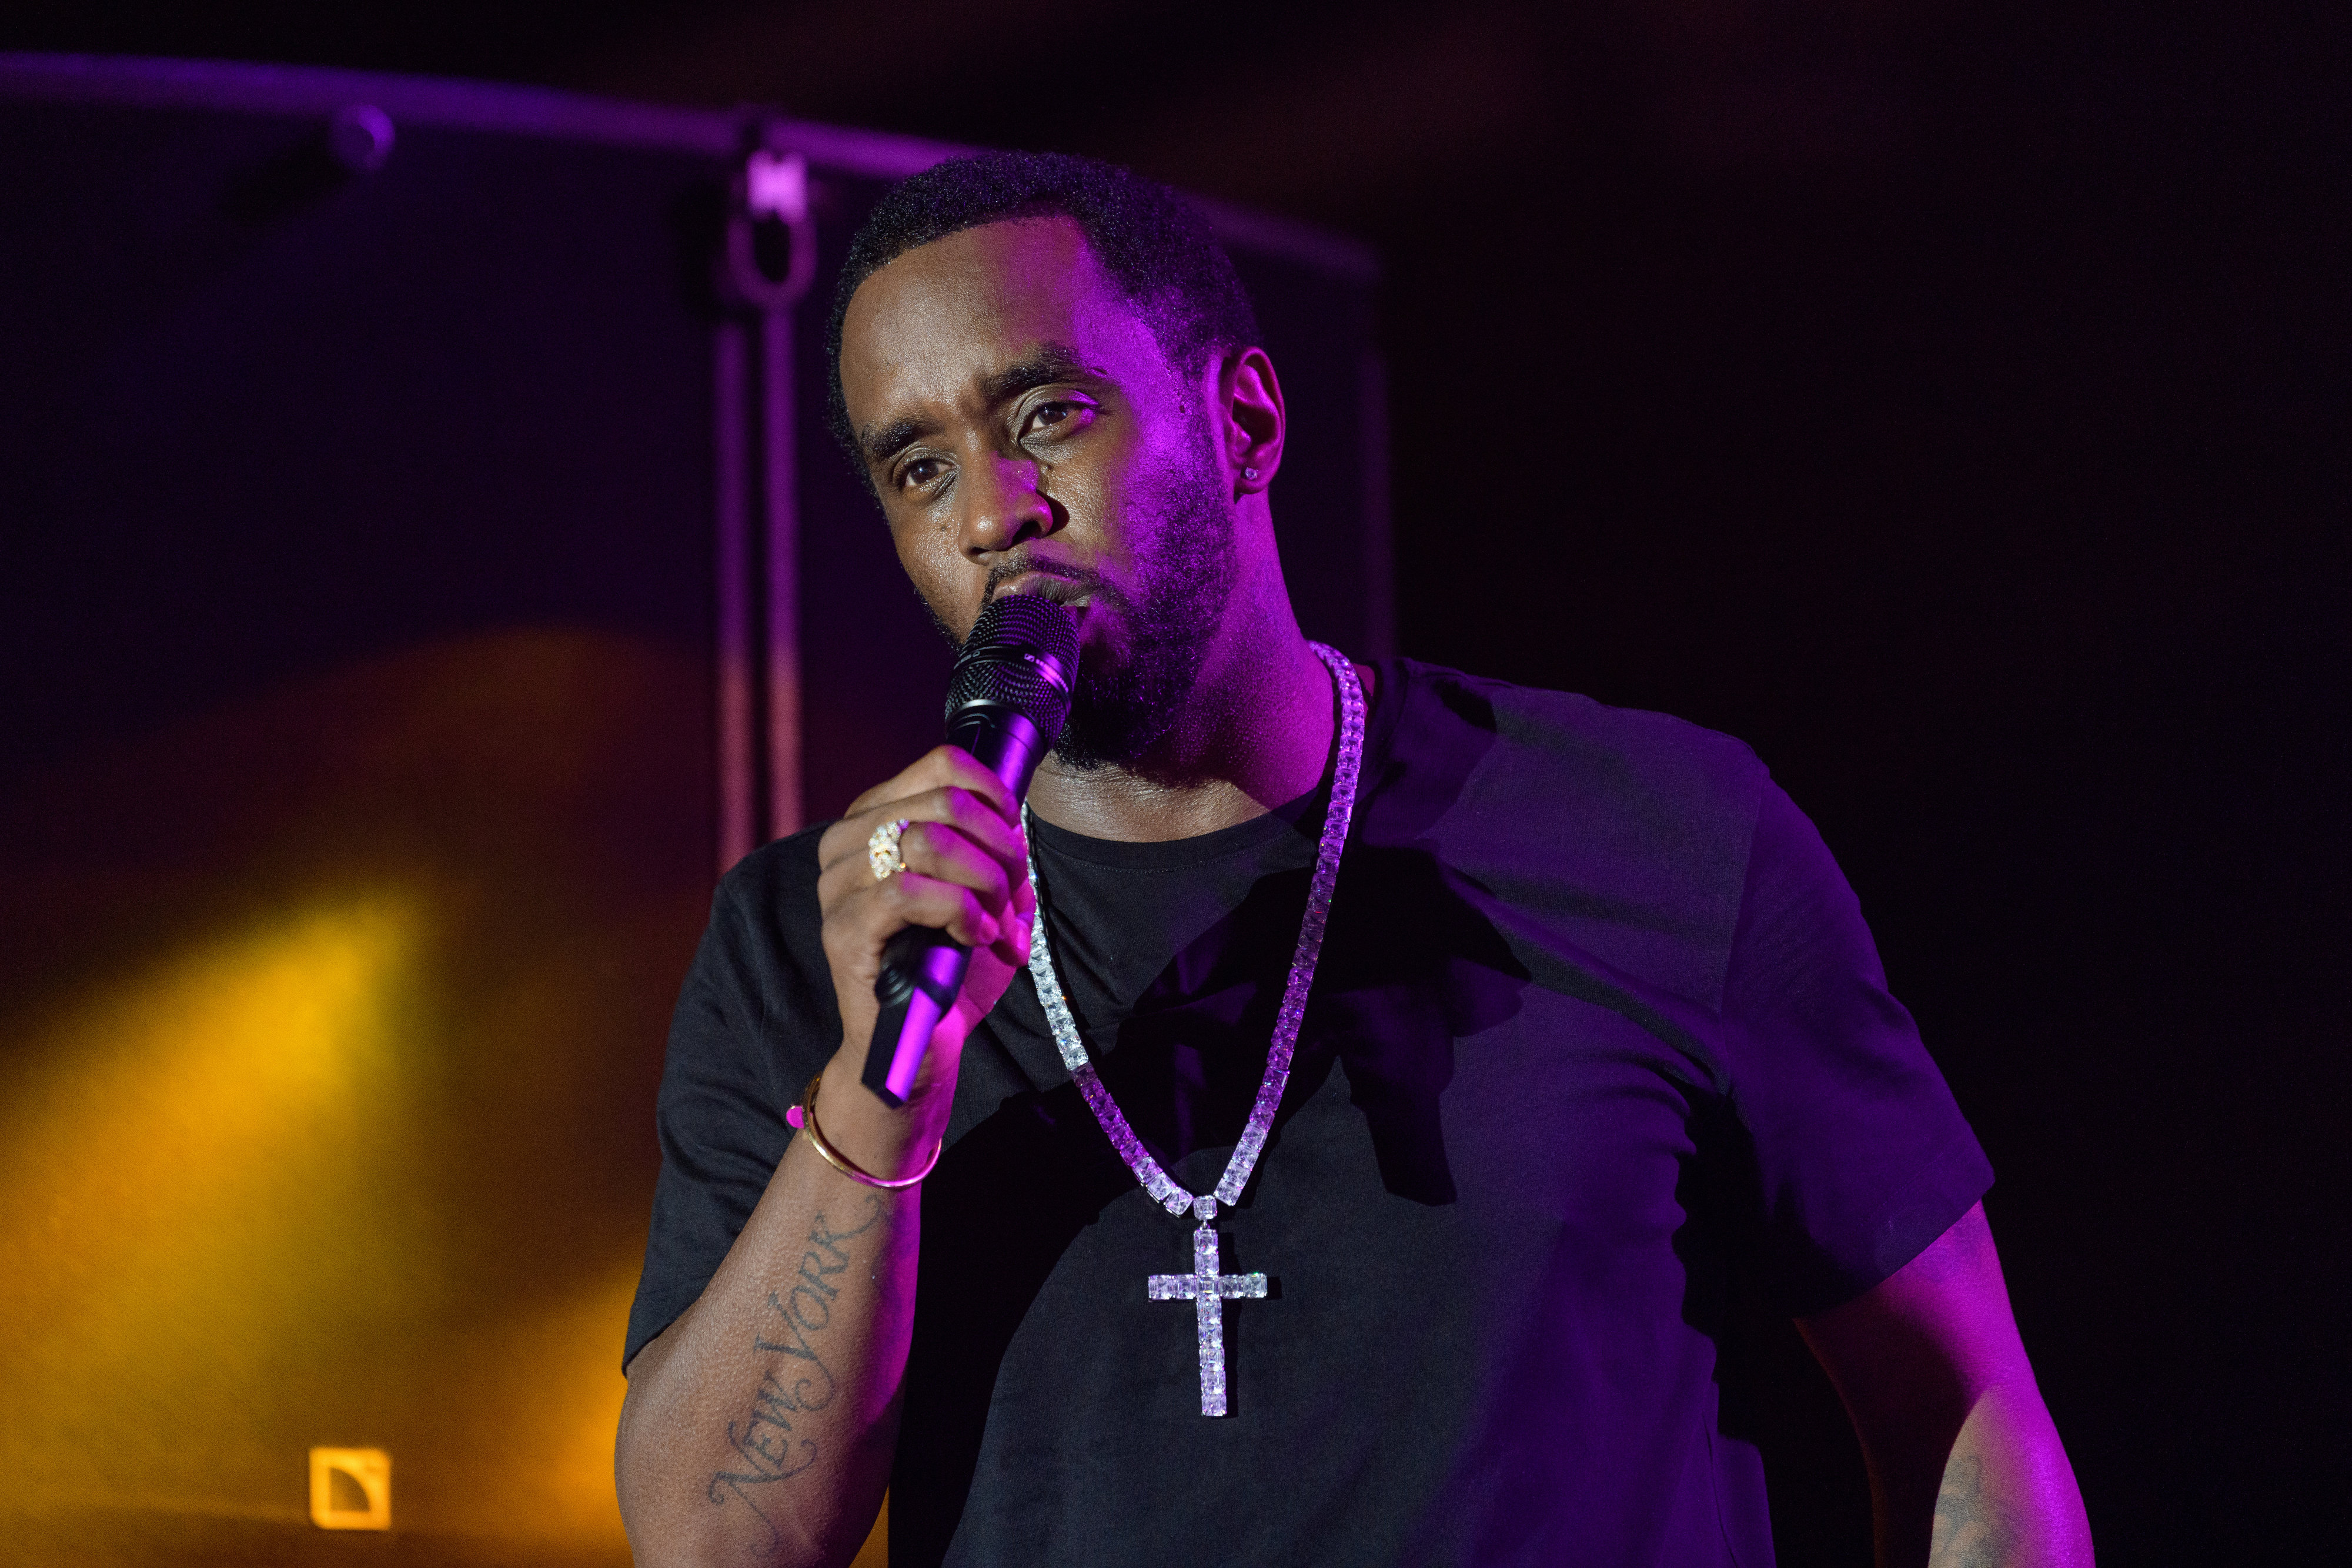 Sean &quot;Diddy&quot; Combs holds a microphone on stage, wearing a black shirt and a large jeweled cross necklace